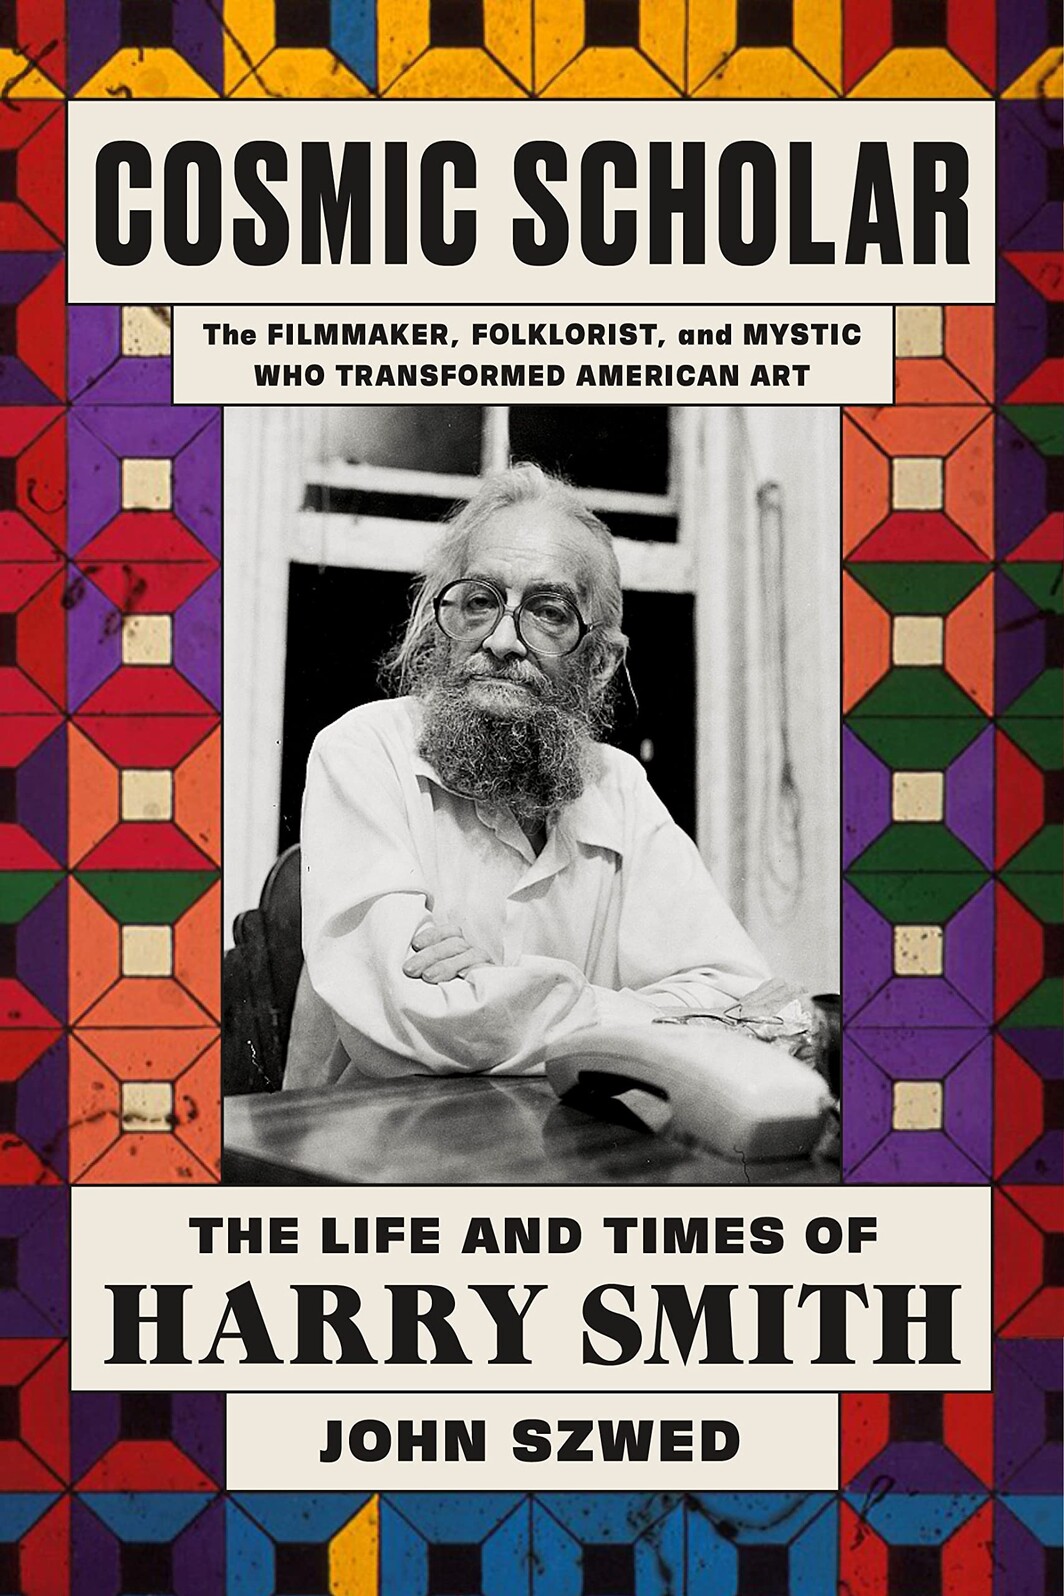 The cover of Cosmic Scholar: The Life and Times of Harry Smith